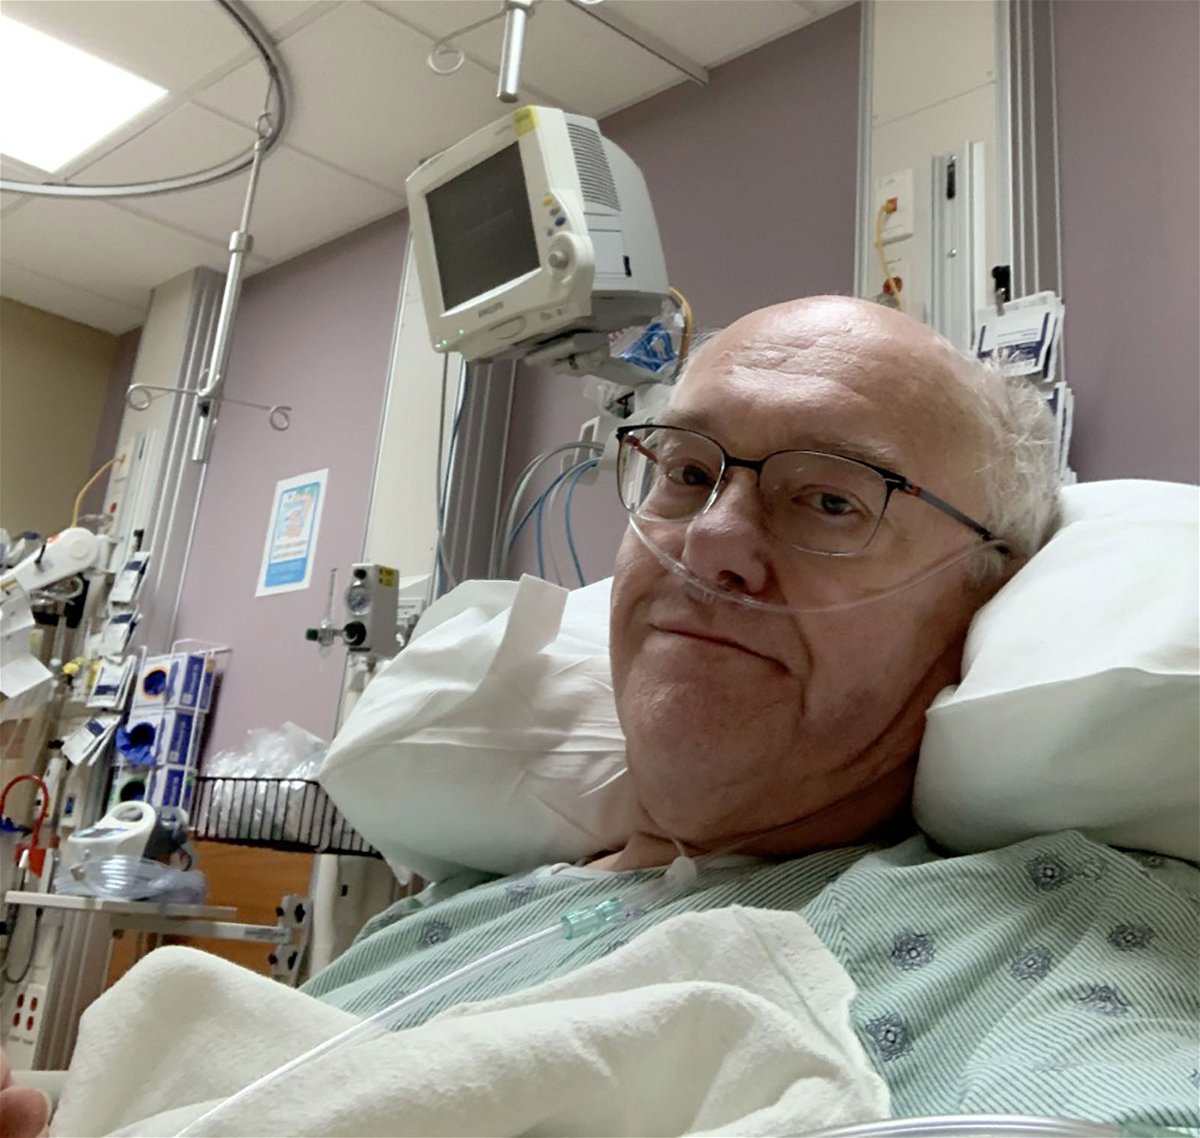 <i>Courtesy David Adams</i><br/>David Adams in the hospital during a flareup of VEXAS syndrome symptoms.